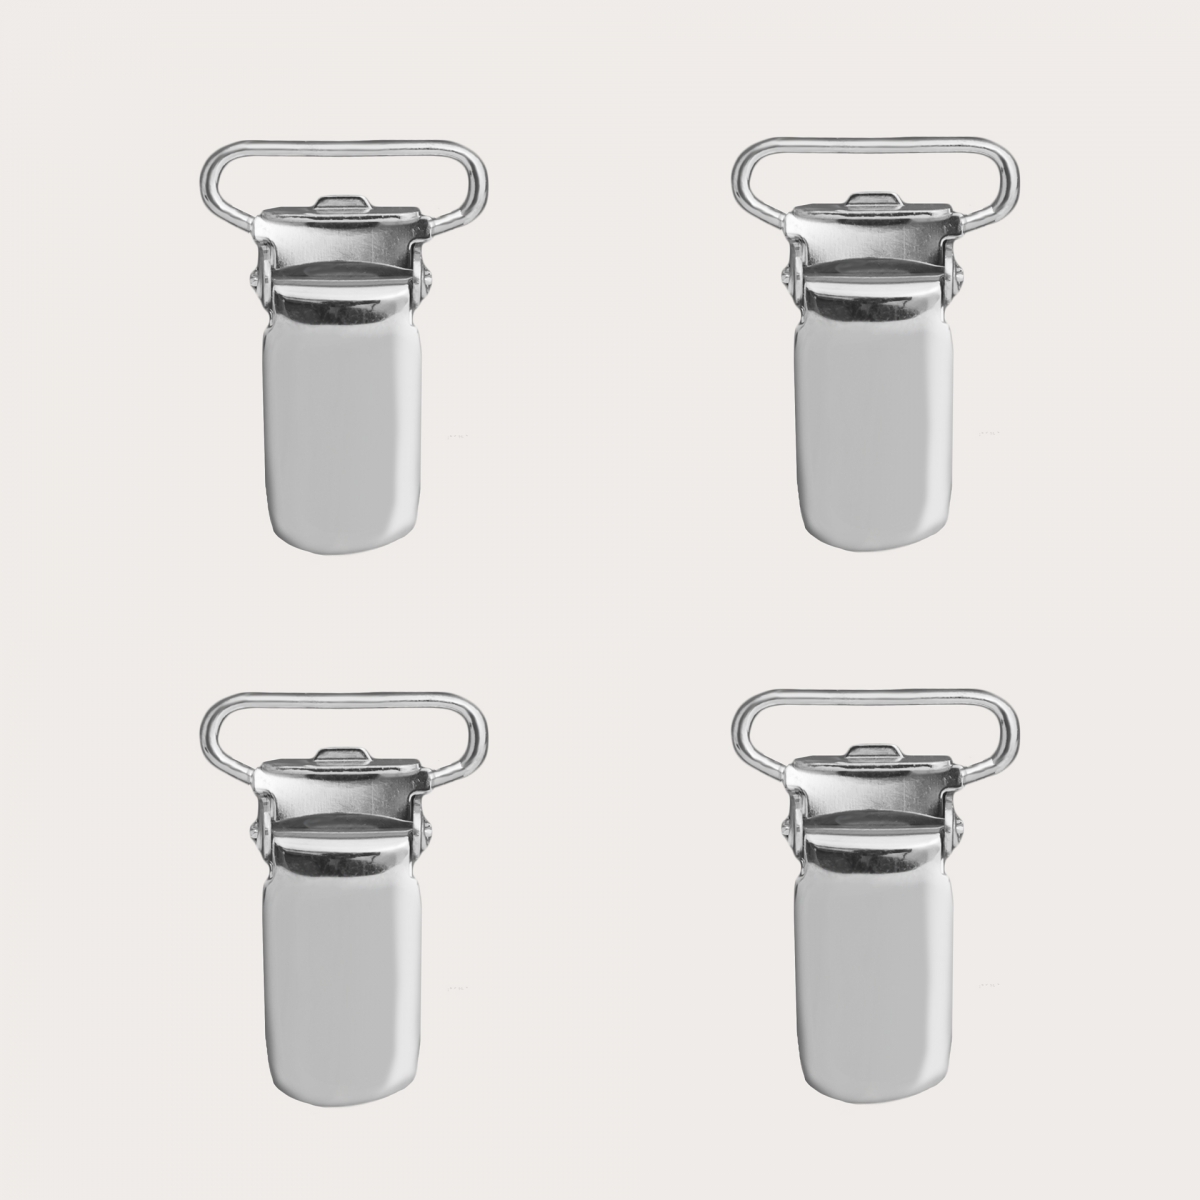 Replacement clip 4 pz. set for 25mm suspenders, nickel free